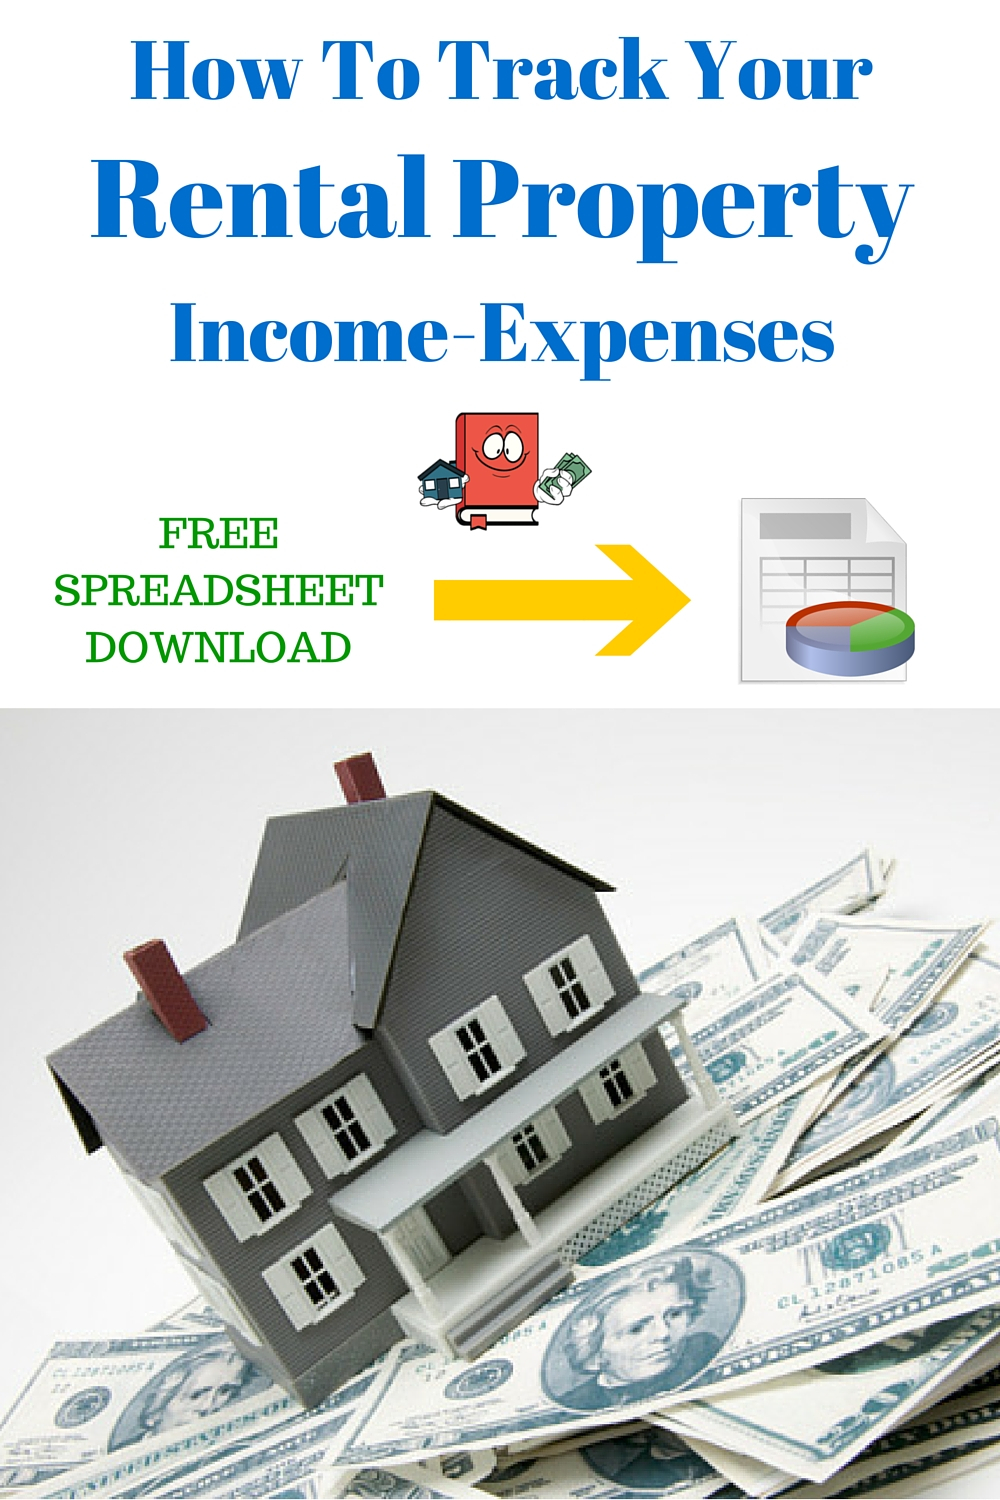 Income Expense Spreadsheet For Rental Property pertaining to How To Keep Track Of Rental Property Expenses